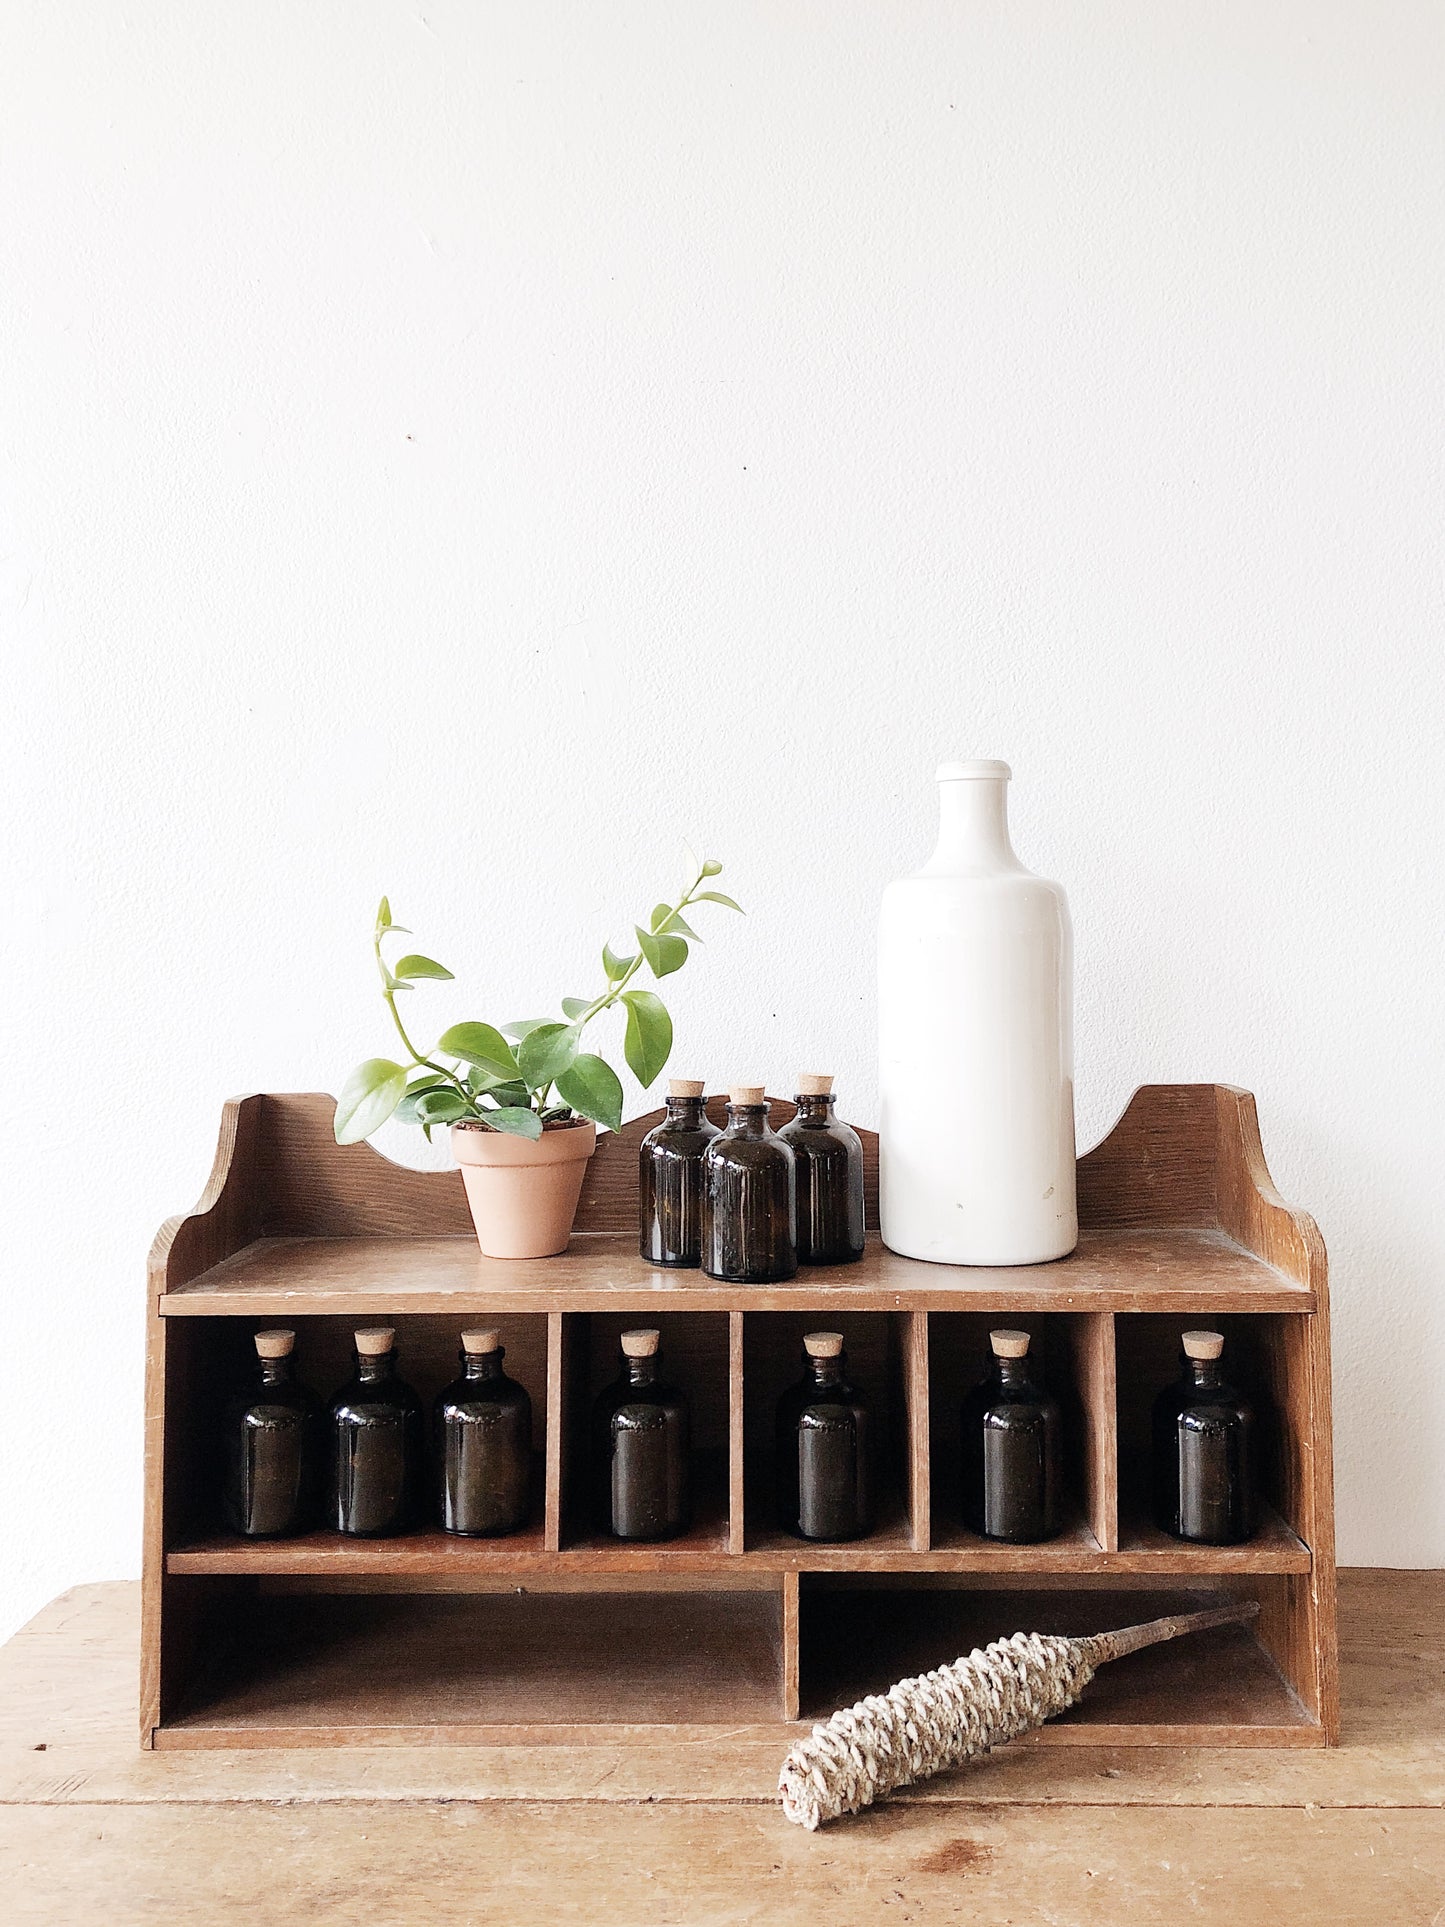 Vintage Wood Apothecary Shelf and Bottles